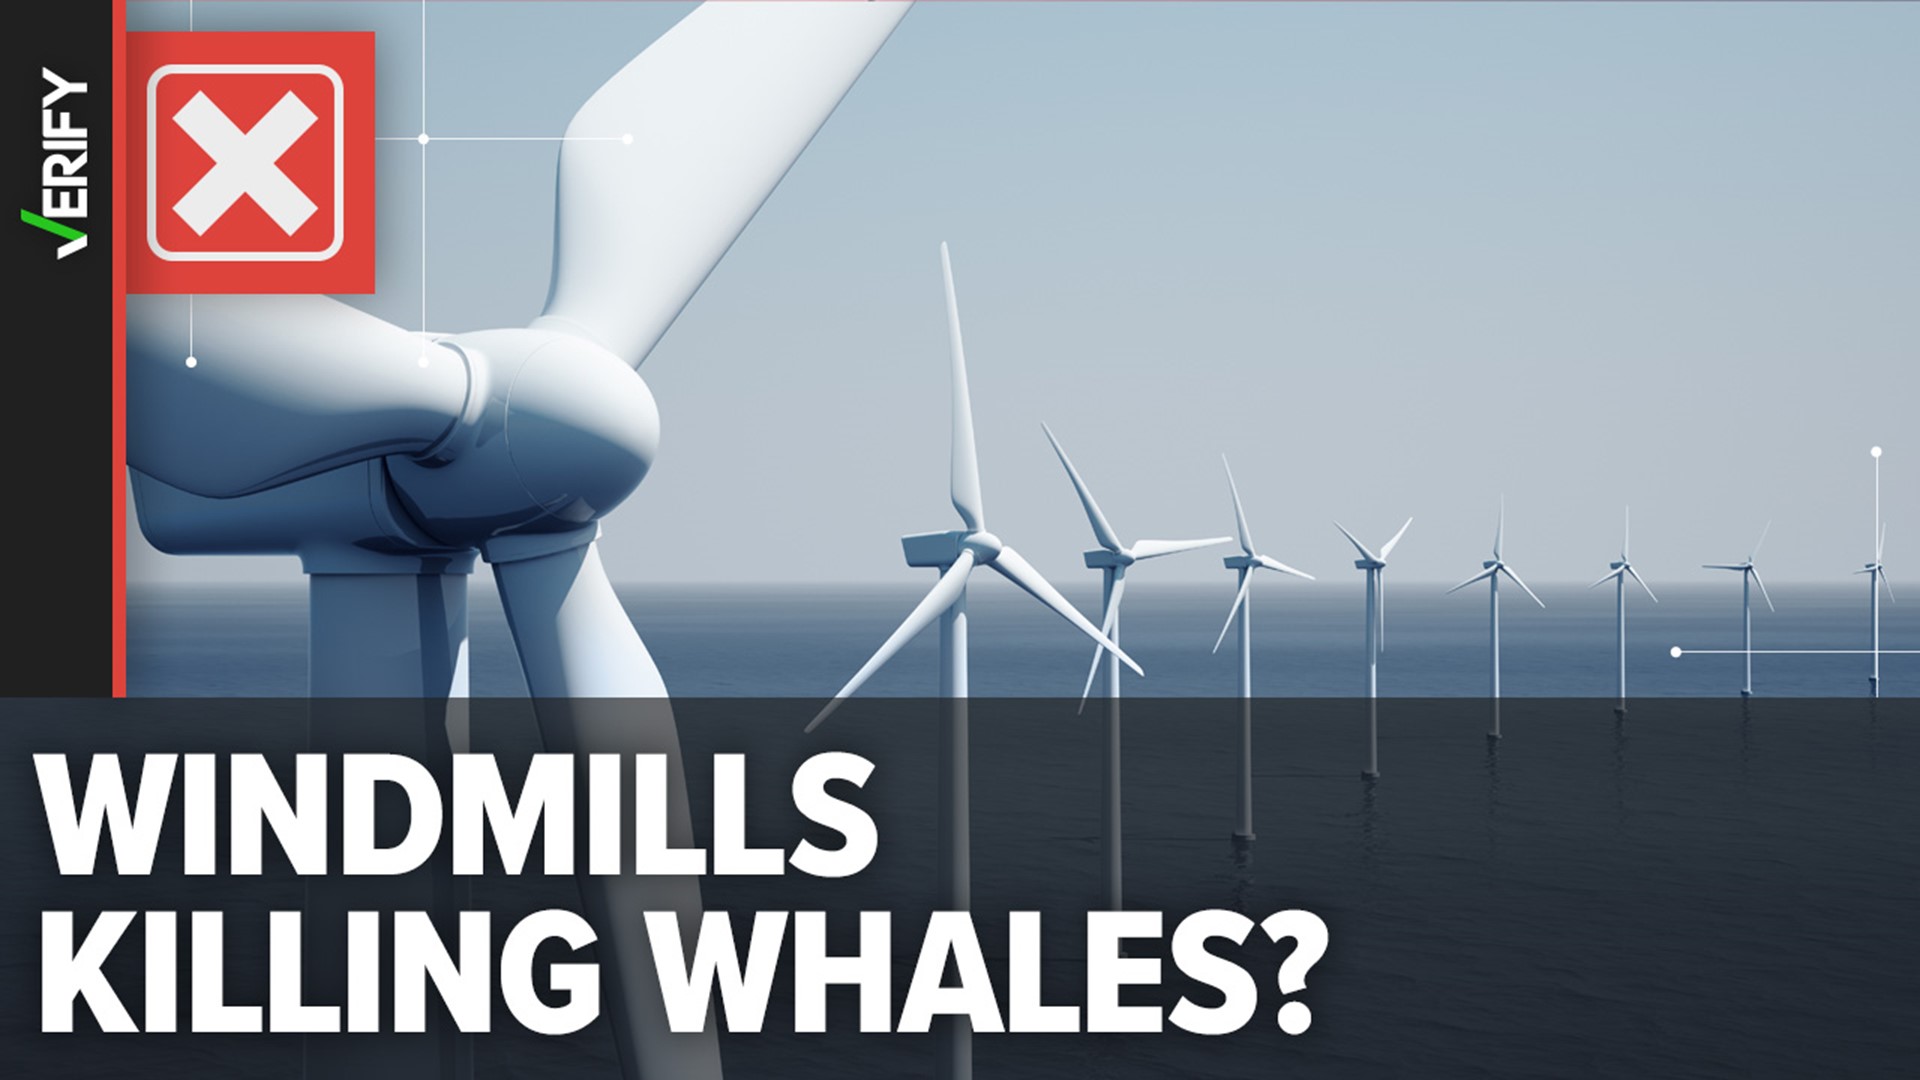 Former President Donald Trump recently claimed that “windmills are causing whales to die” in record numbers, but there’s no scientific evidence to support that.